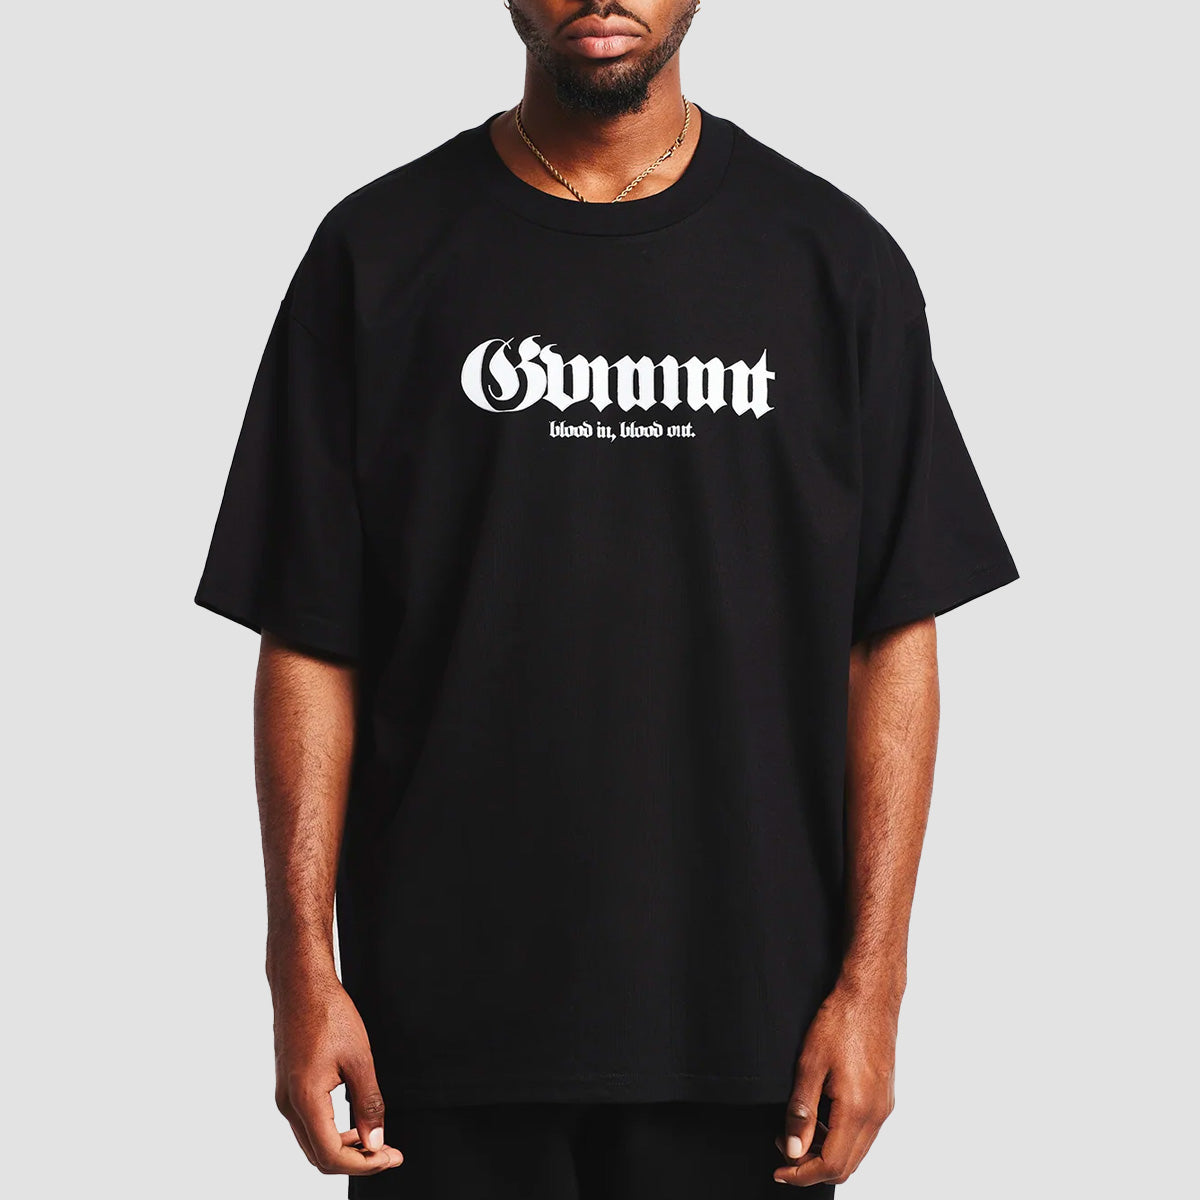 GVNMNT Blood In Blood Out T-Shirt Black